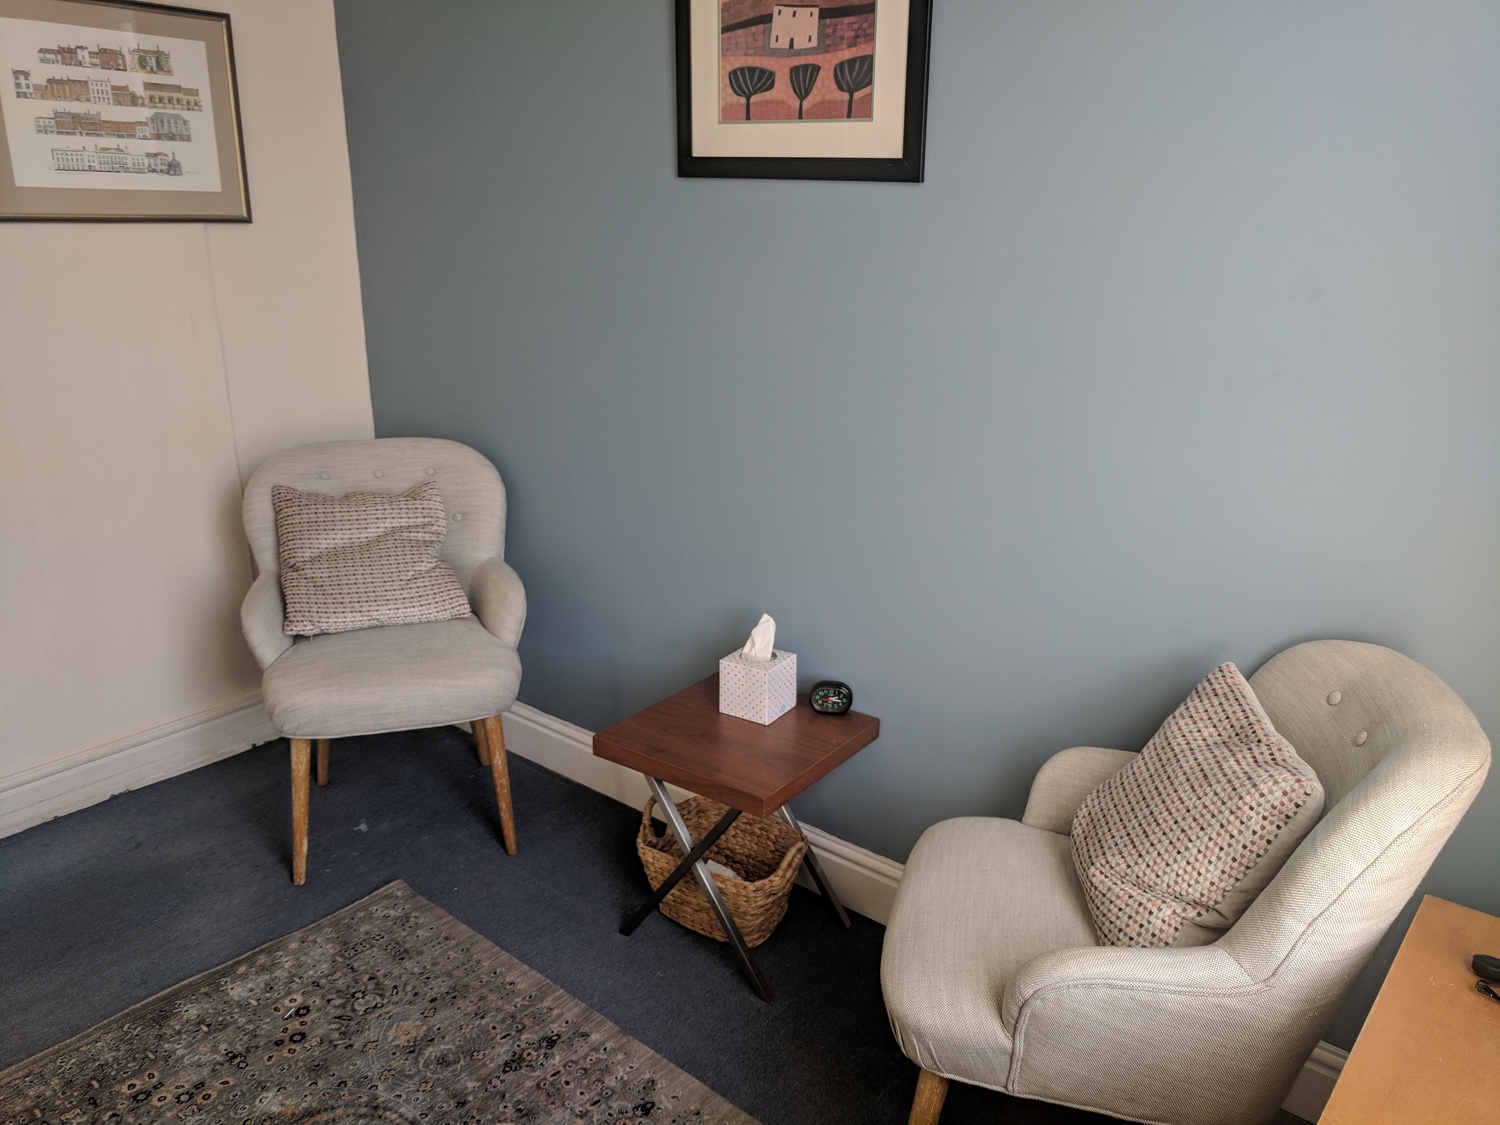 Gallery Photo of Warm,private counselling room.